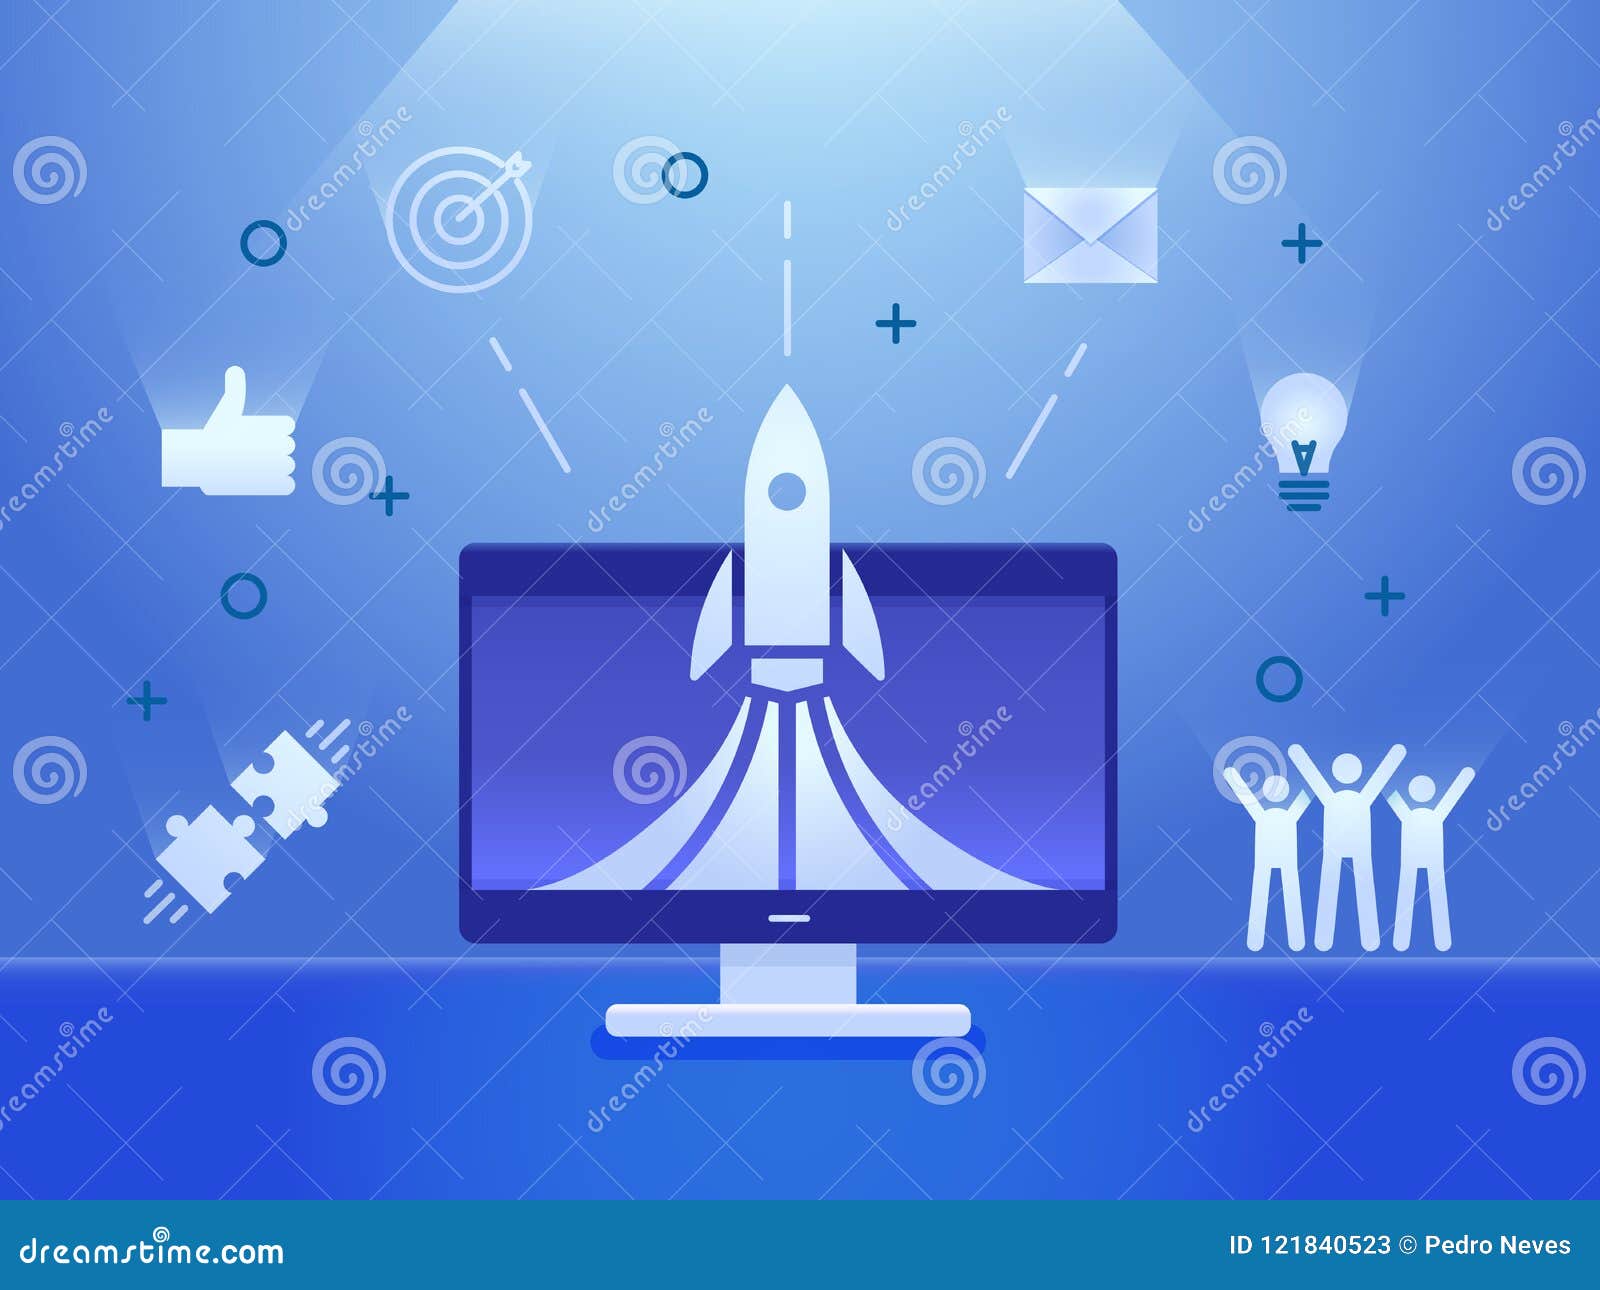 rocket launch on a computer screen with business icons banner.   concept for startups, teamwork